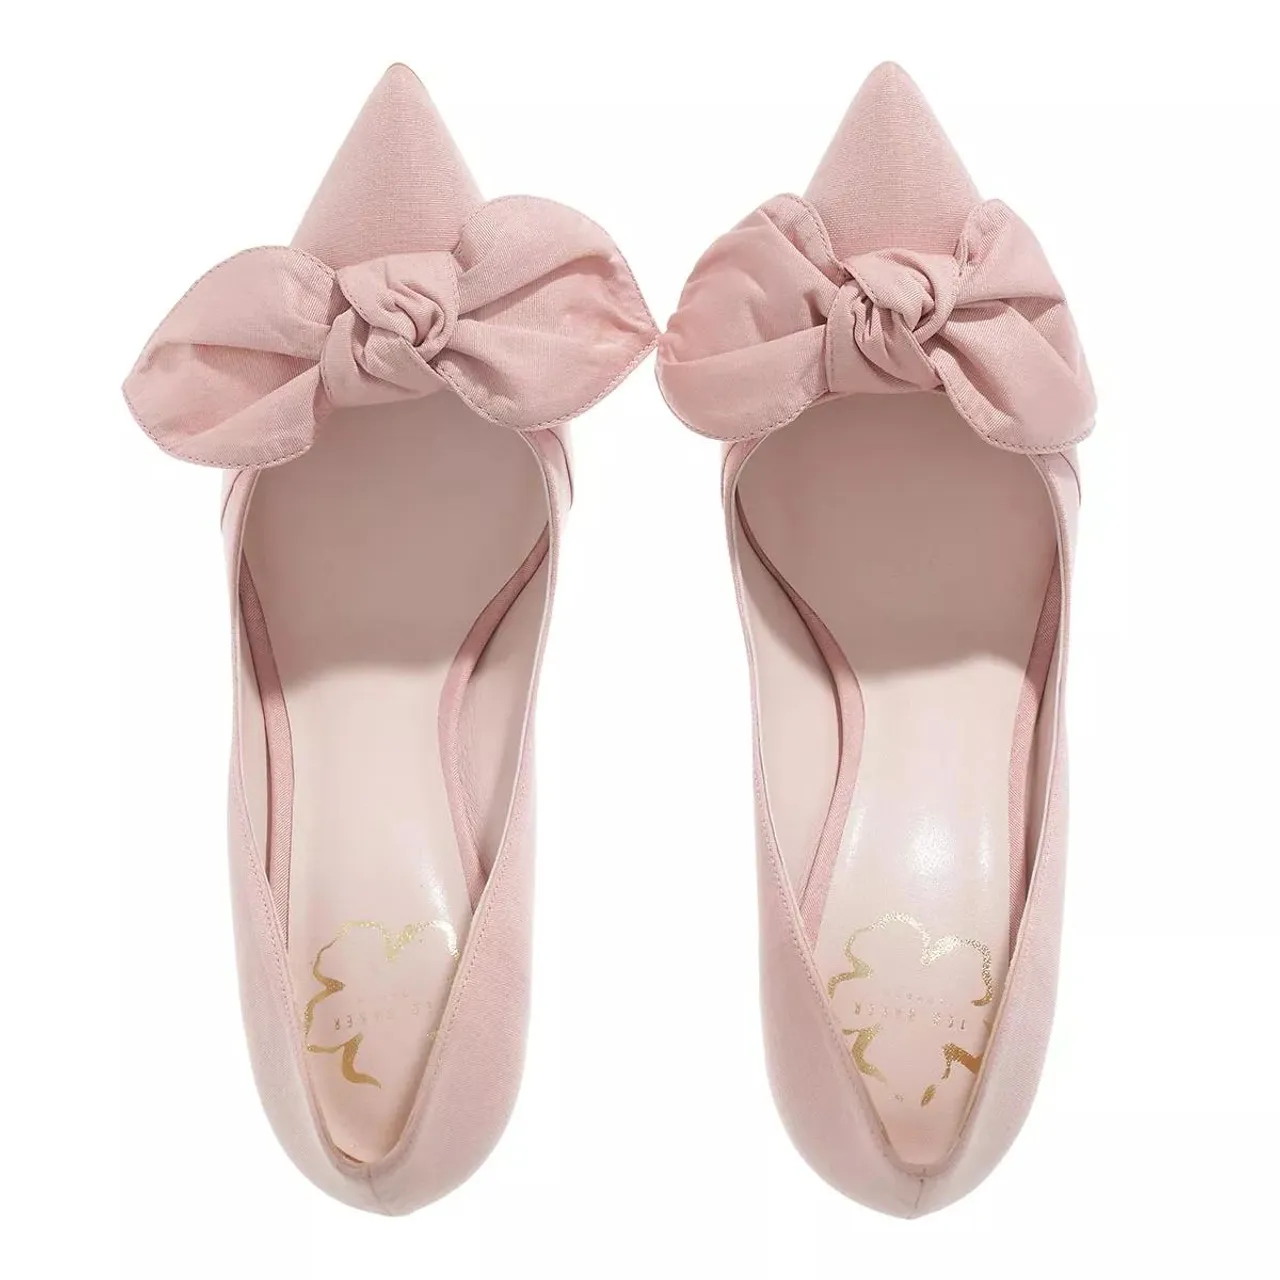 Ted Baker Pumps & High Heels - Hyana Moire Satin Bow 100Mm Court Shoe - rose - Pumps & High Heels for ladies